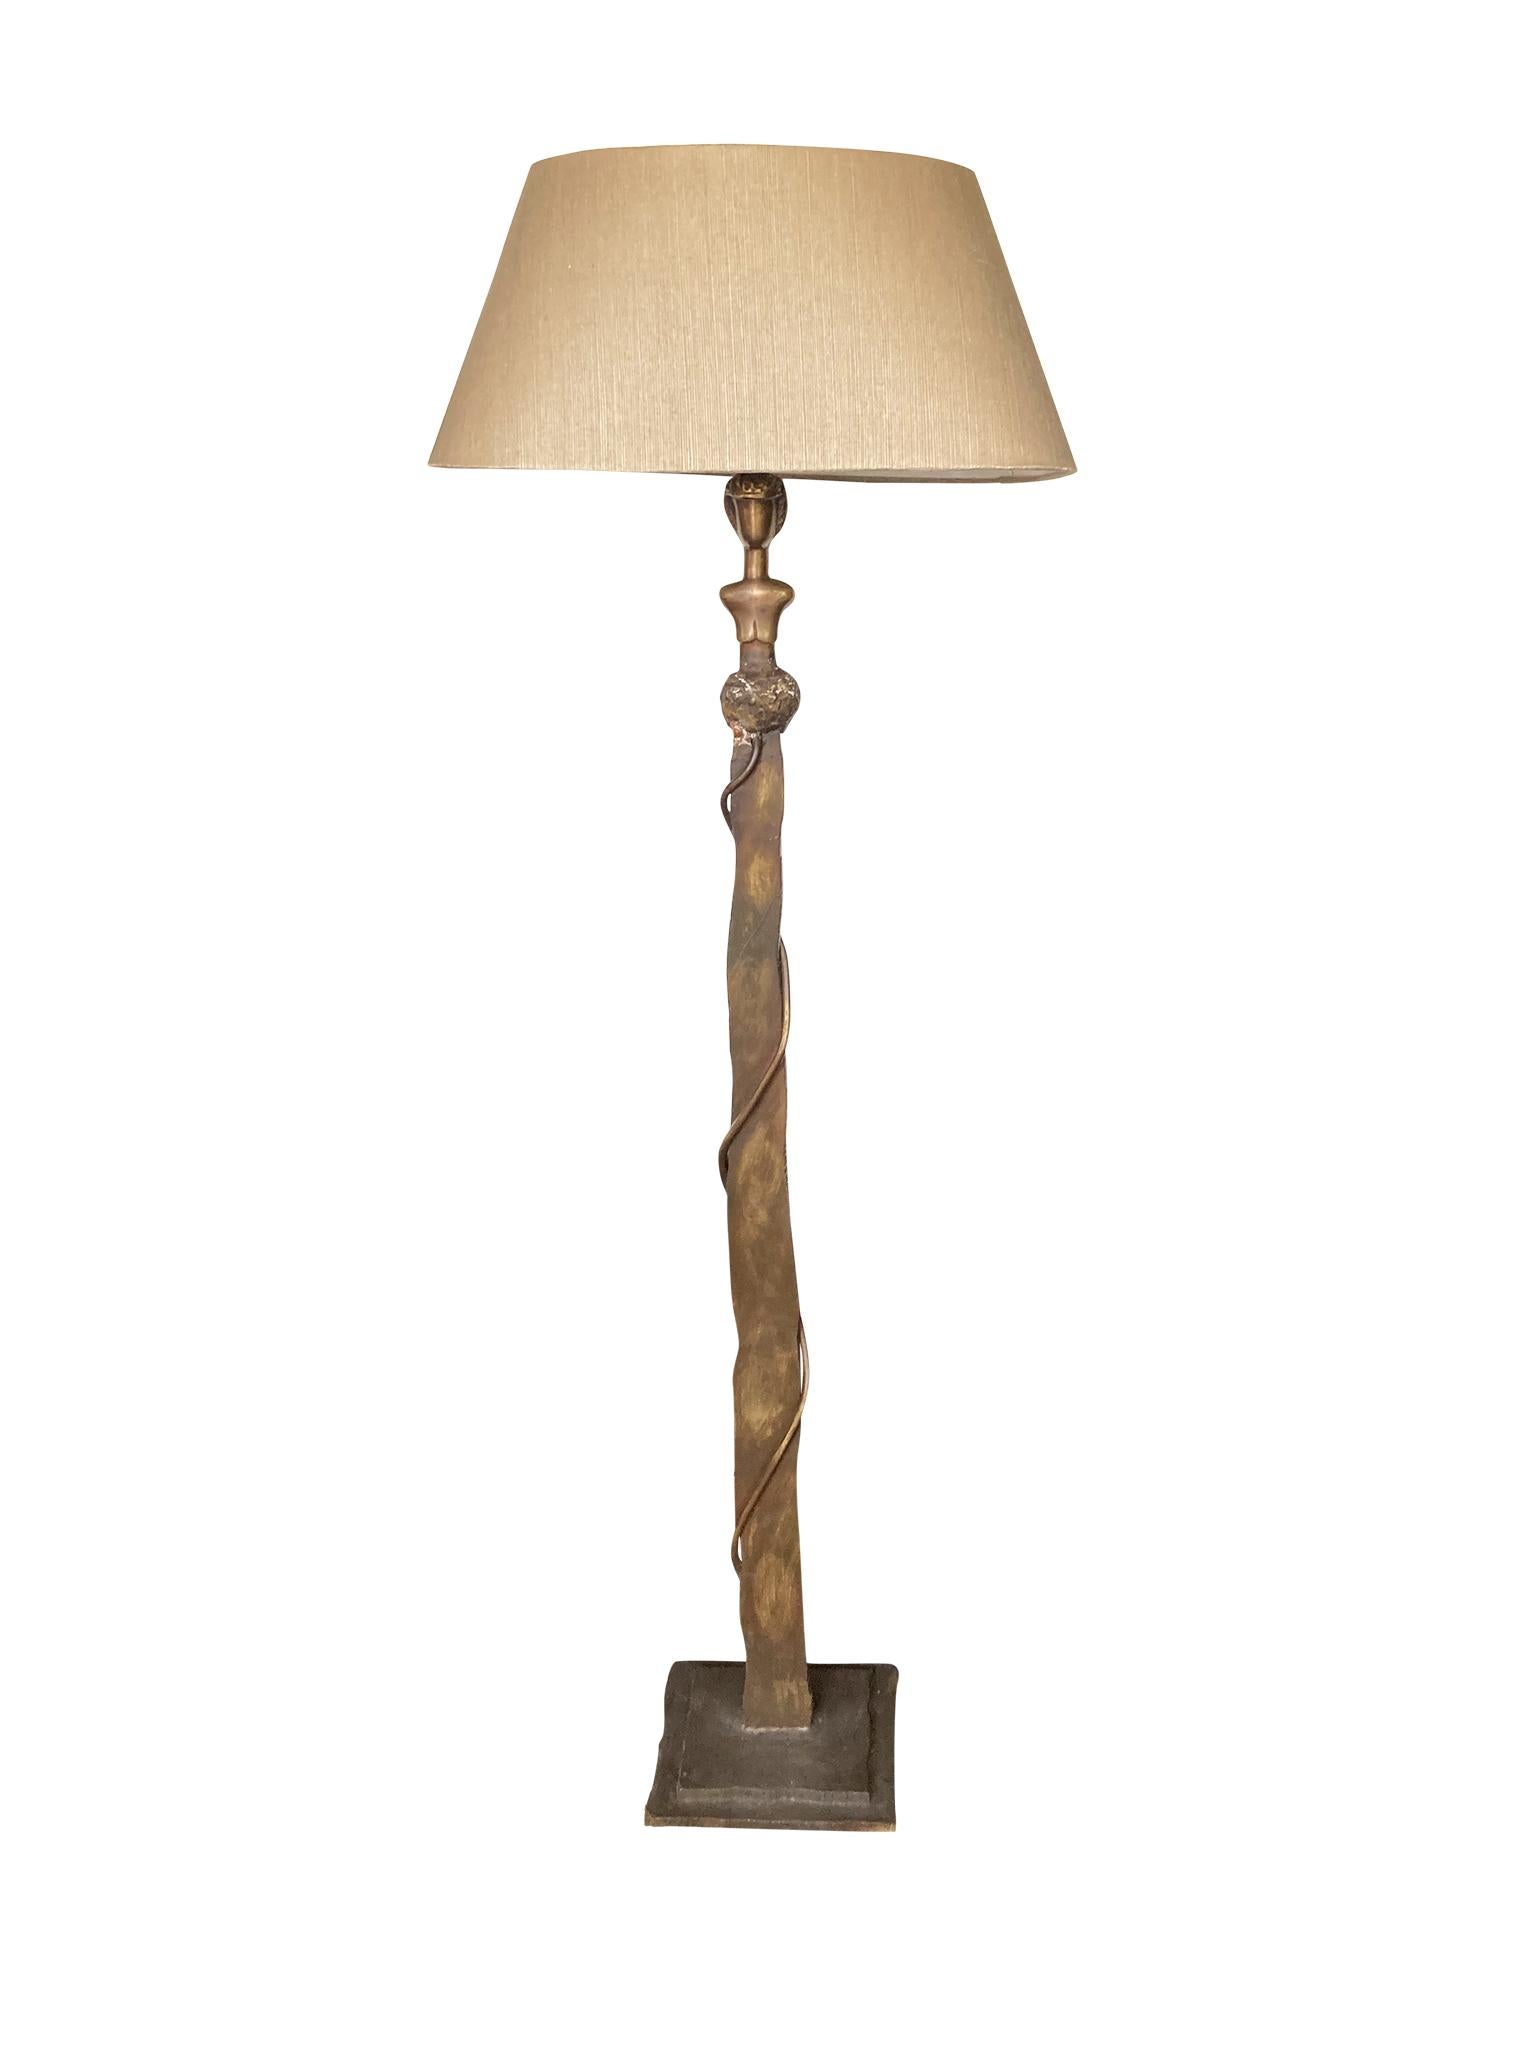 Mid-20th century bronze floor lamp in the style of artist Alberto Giacometti. The lamp stands tall with a flat bar stem on a rectangular base, and culminates at top with a bust of a beautifully abstracted figure. We love the patina of the bronze and